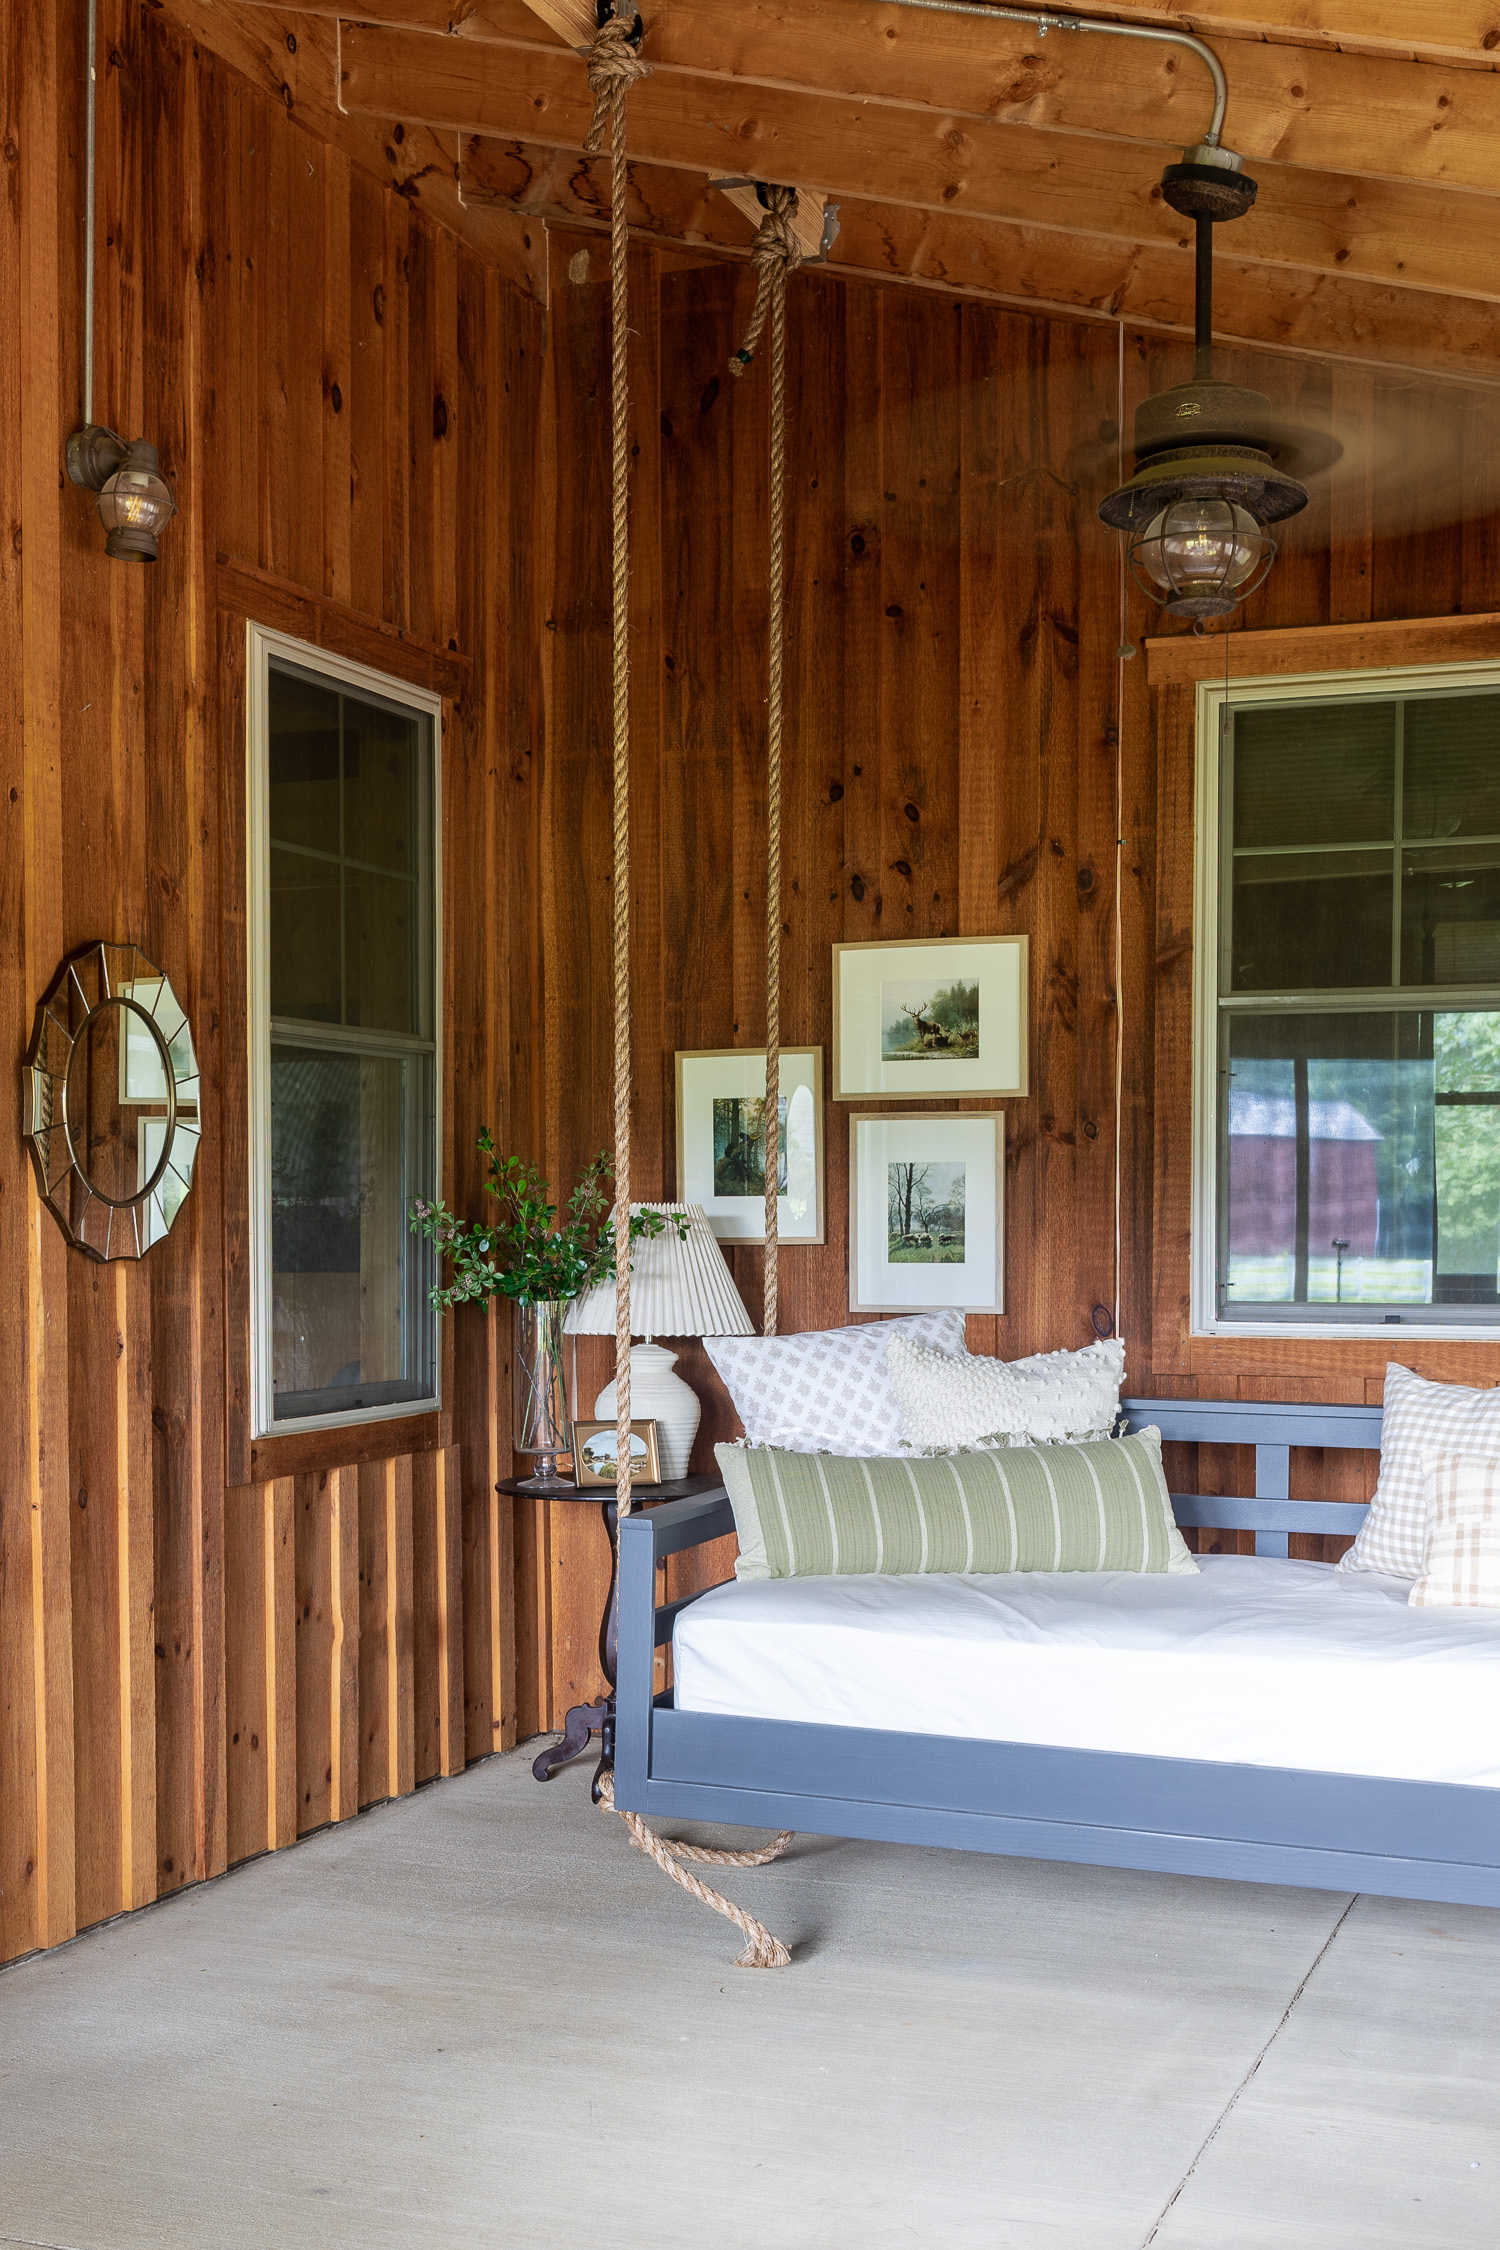 barndominium screened in porch with bed swing, artwork, lamp and pillows